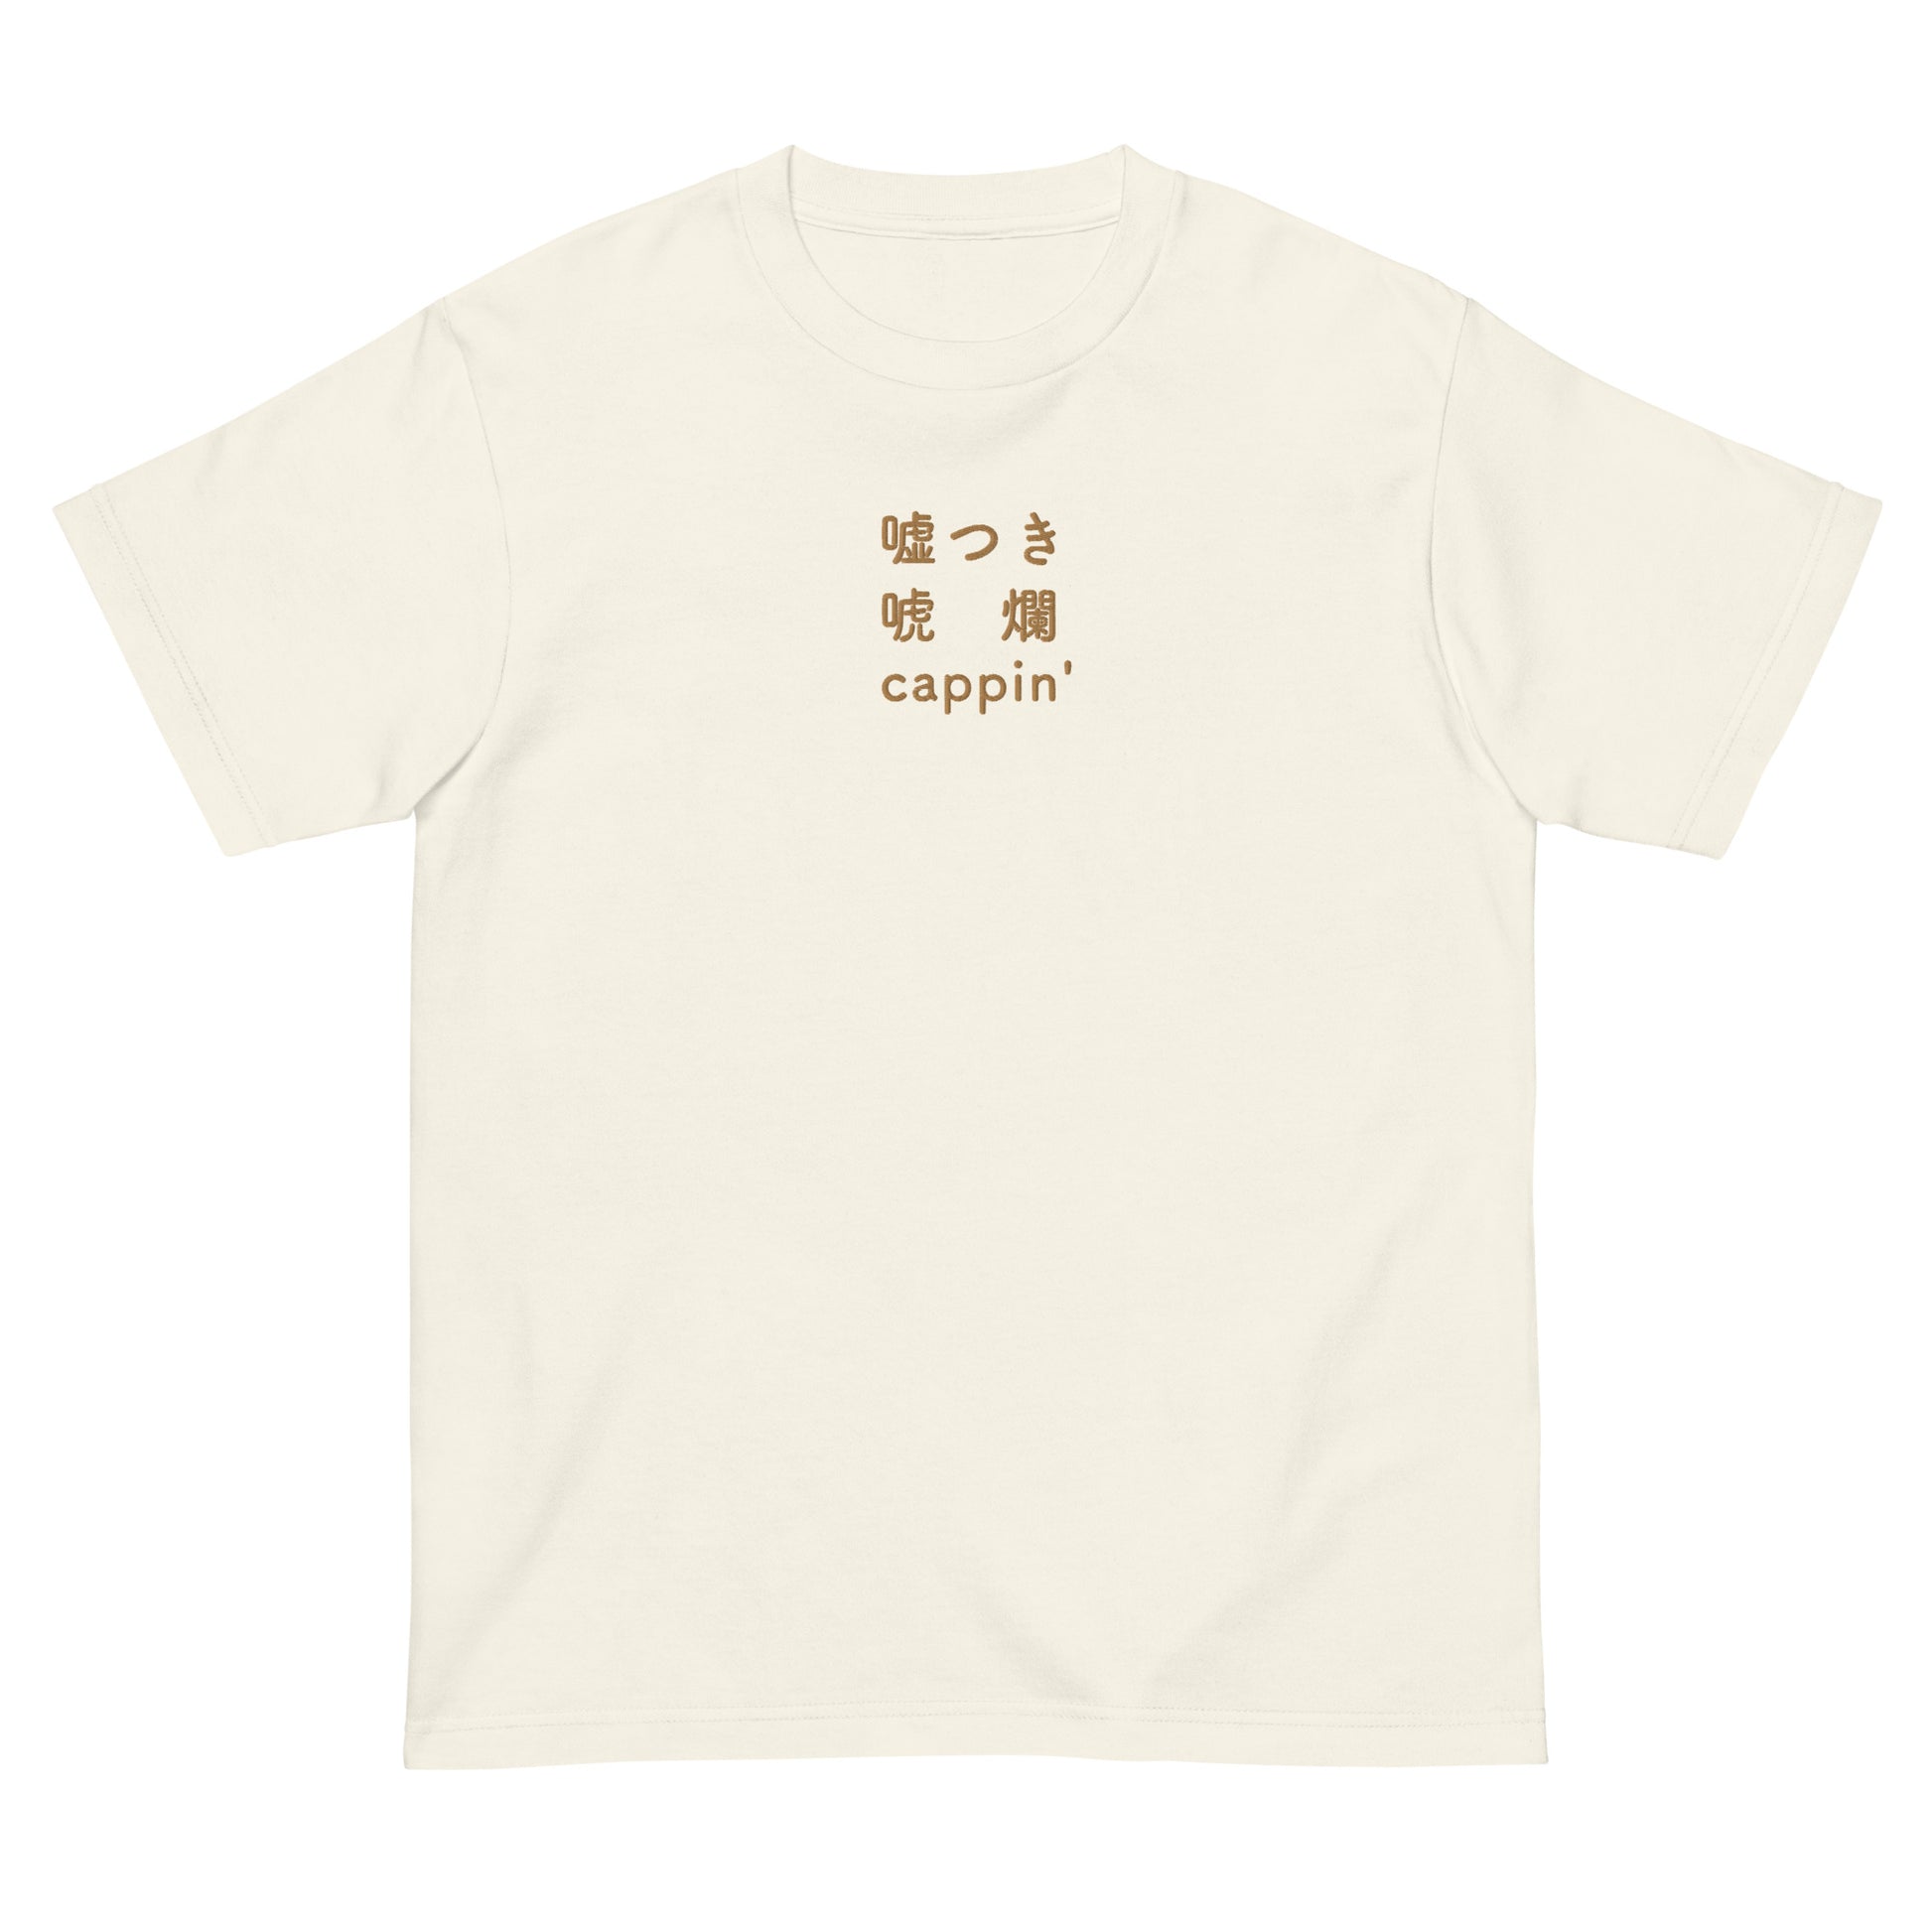 Ivory High Quality Tee - Front Design with an Brown Embroidery "Cappin'" in Japanese,Chinese and English